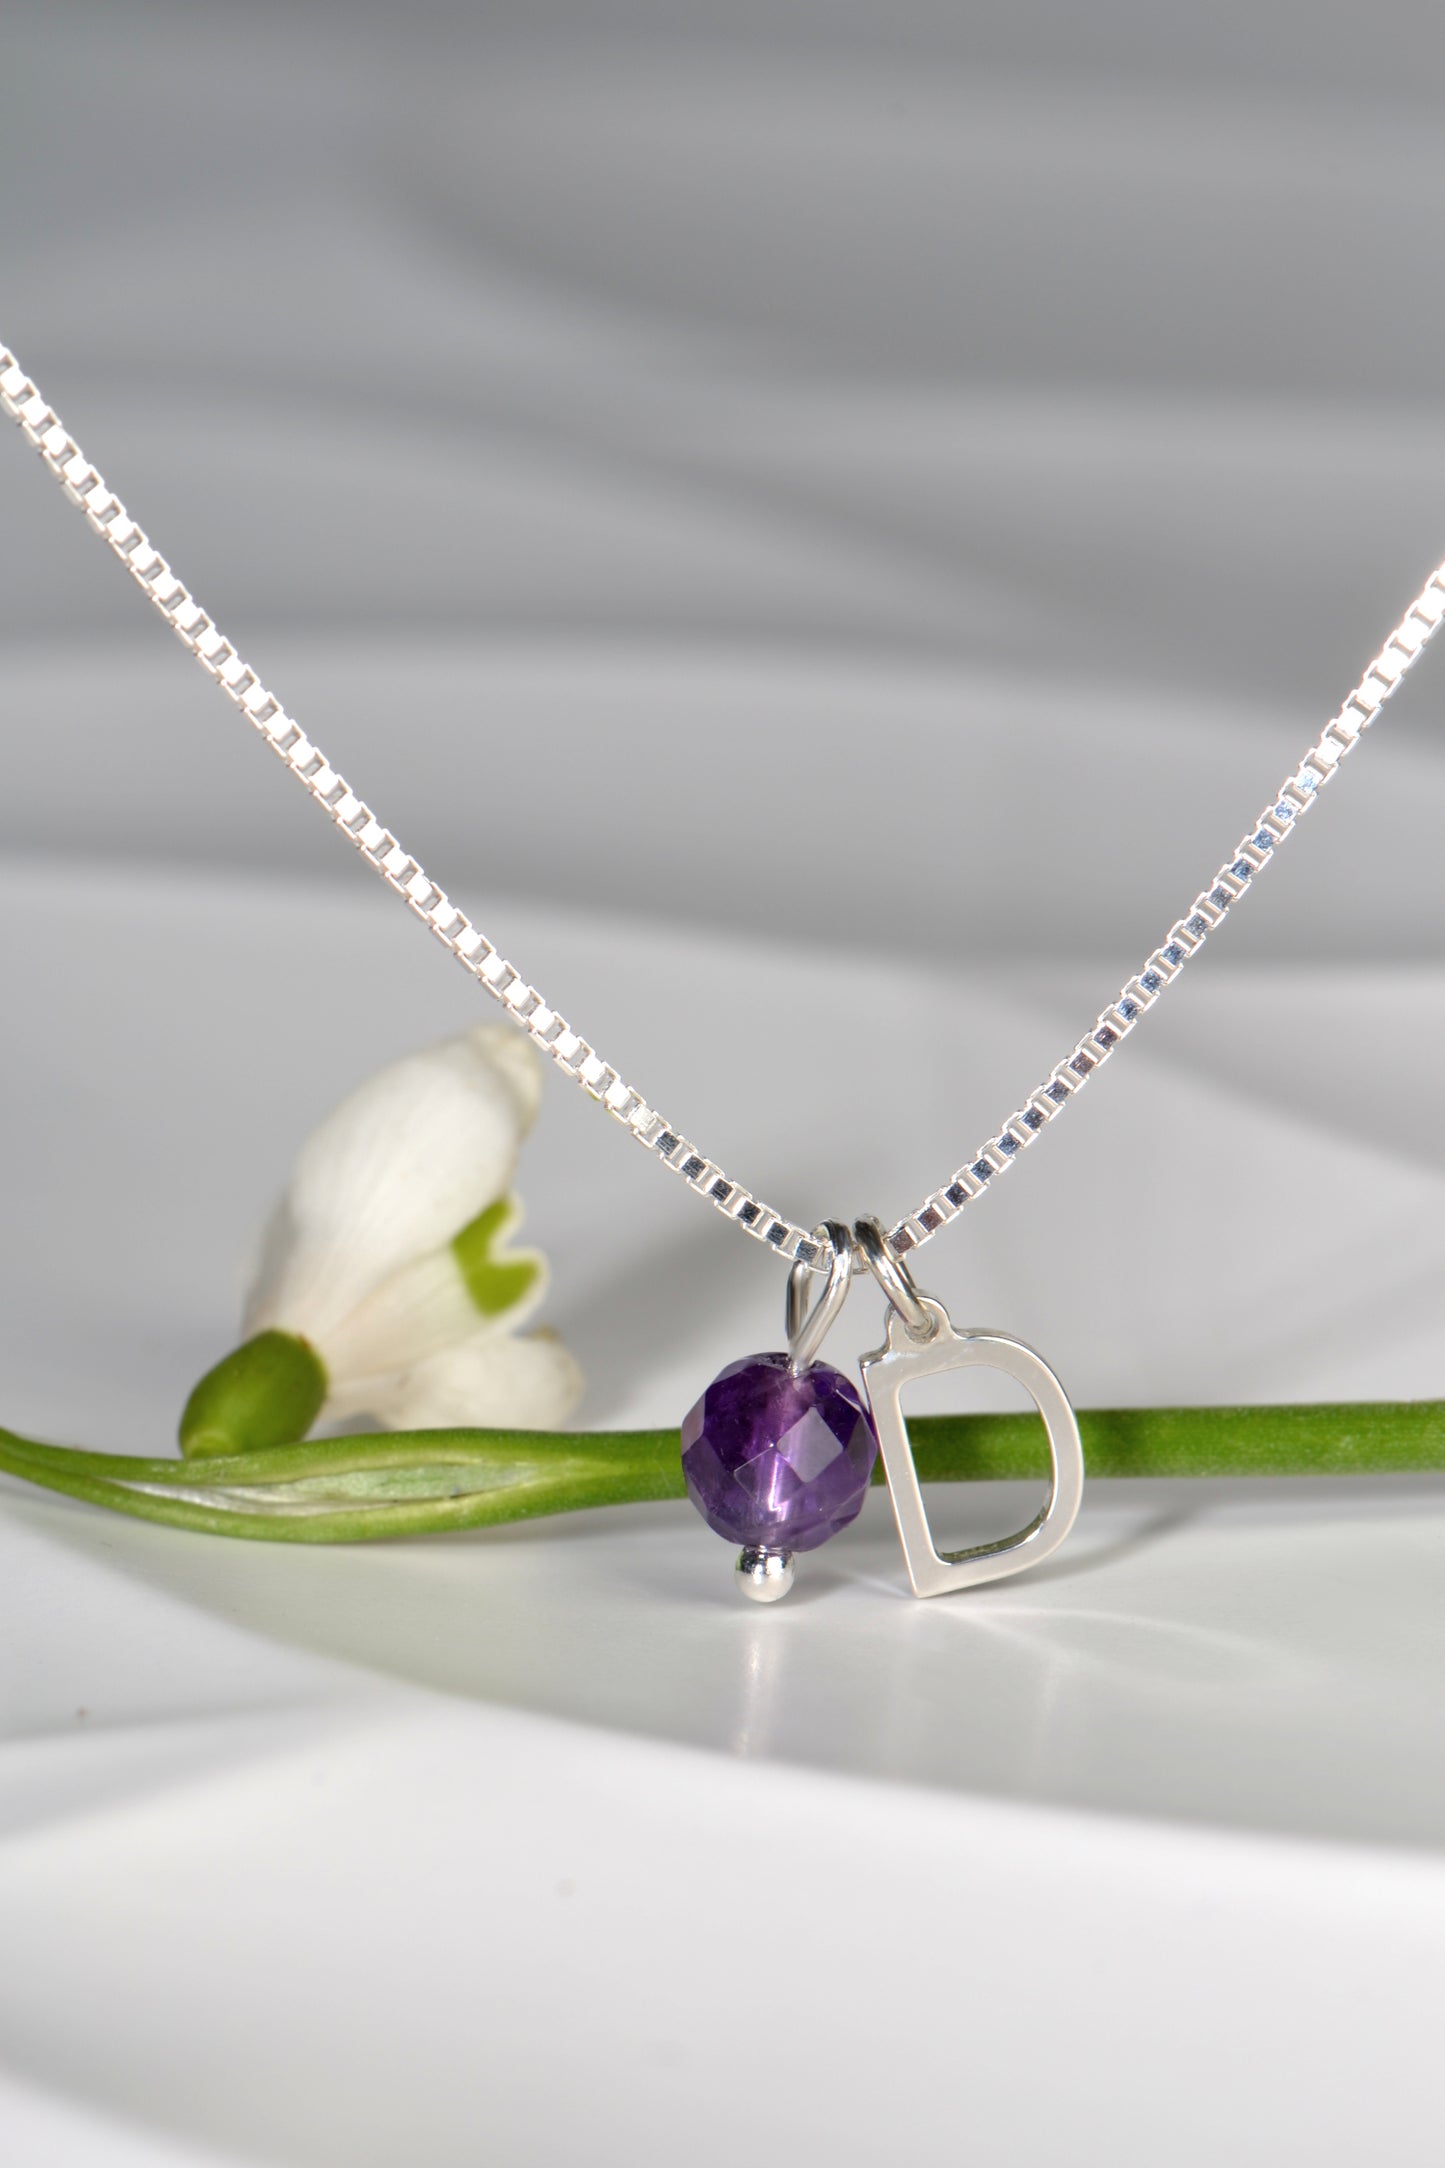 Amethyst initial necklace with snowdrop in the background